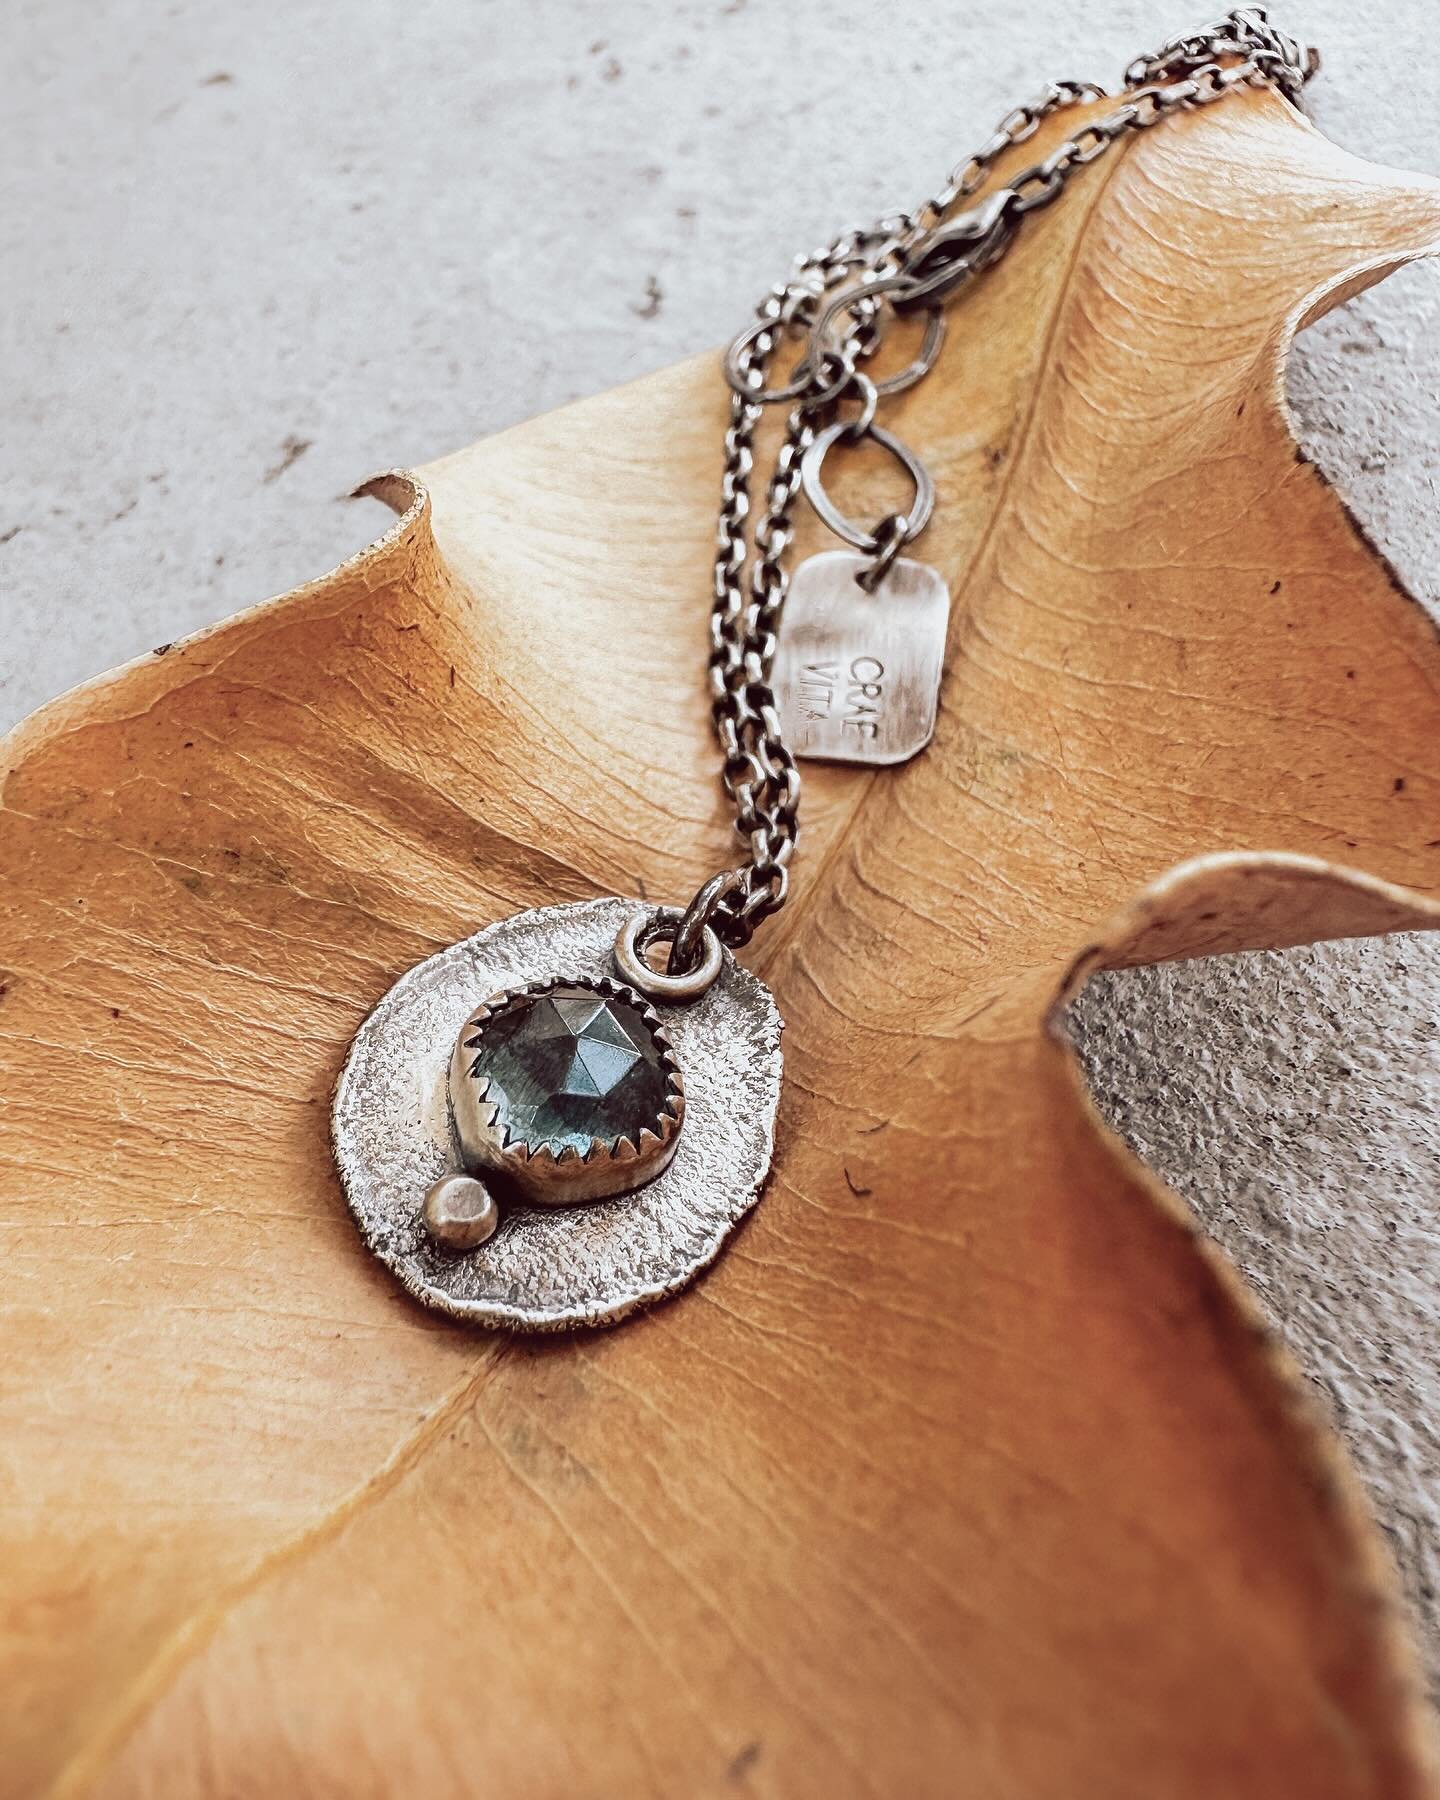 I love making these recycled silver necklaces because each piece is so unique in its rustic charm. It reminds me that we can make something beautiful of what was once a failed attempt. 
.
.
.
.
.
#silversmithing #silversmithjewelry #handmadejewelry #